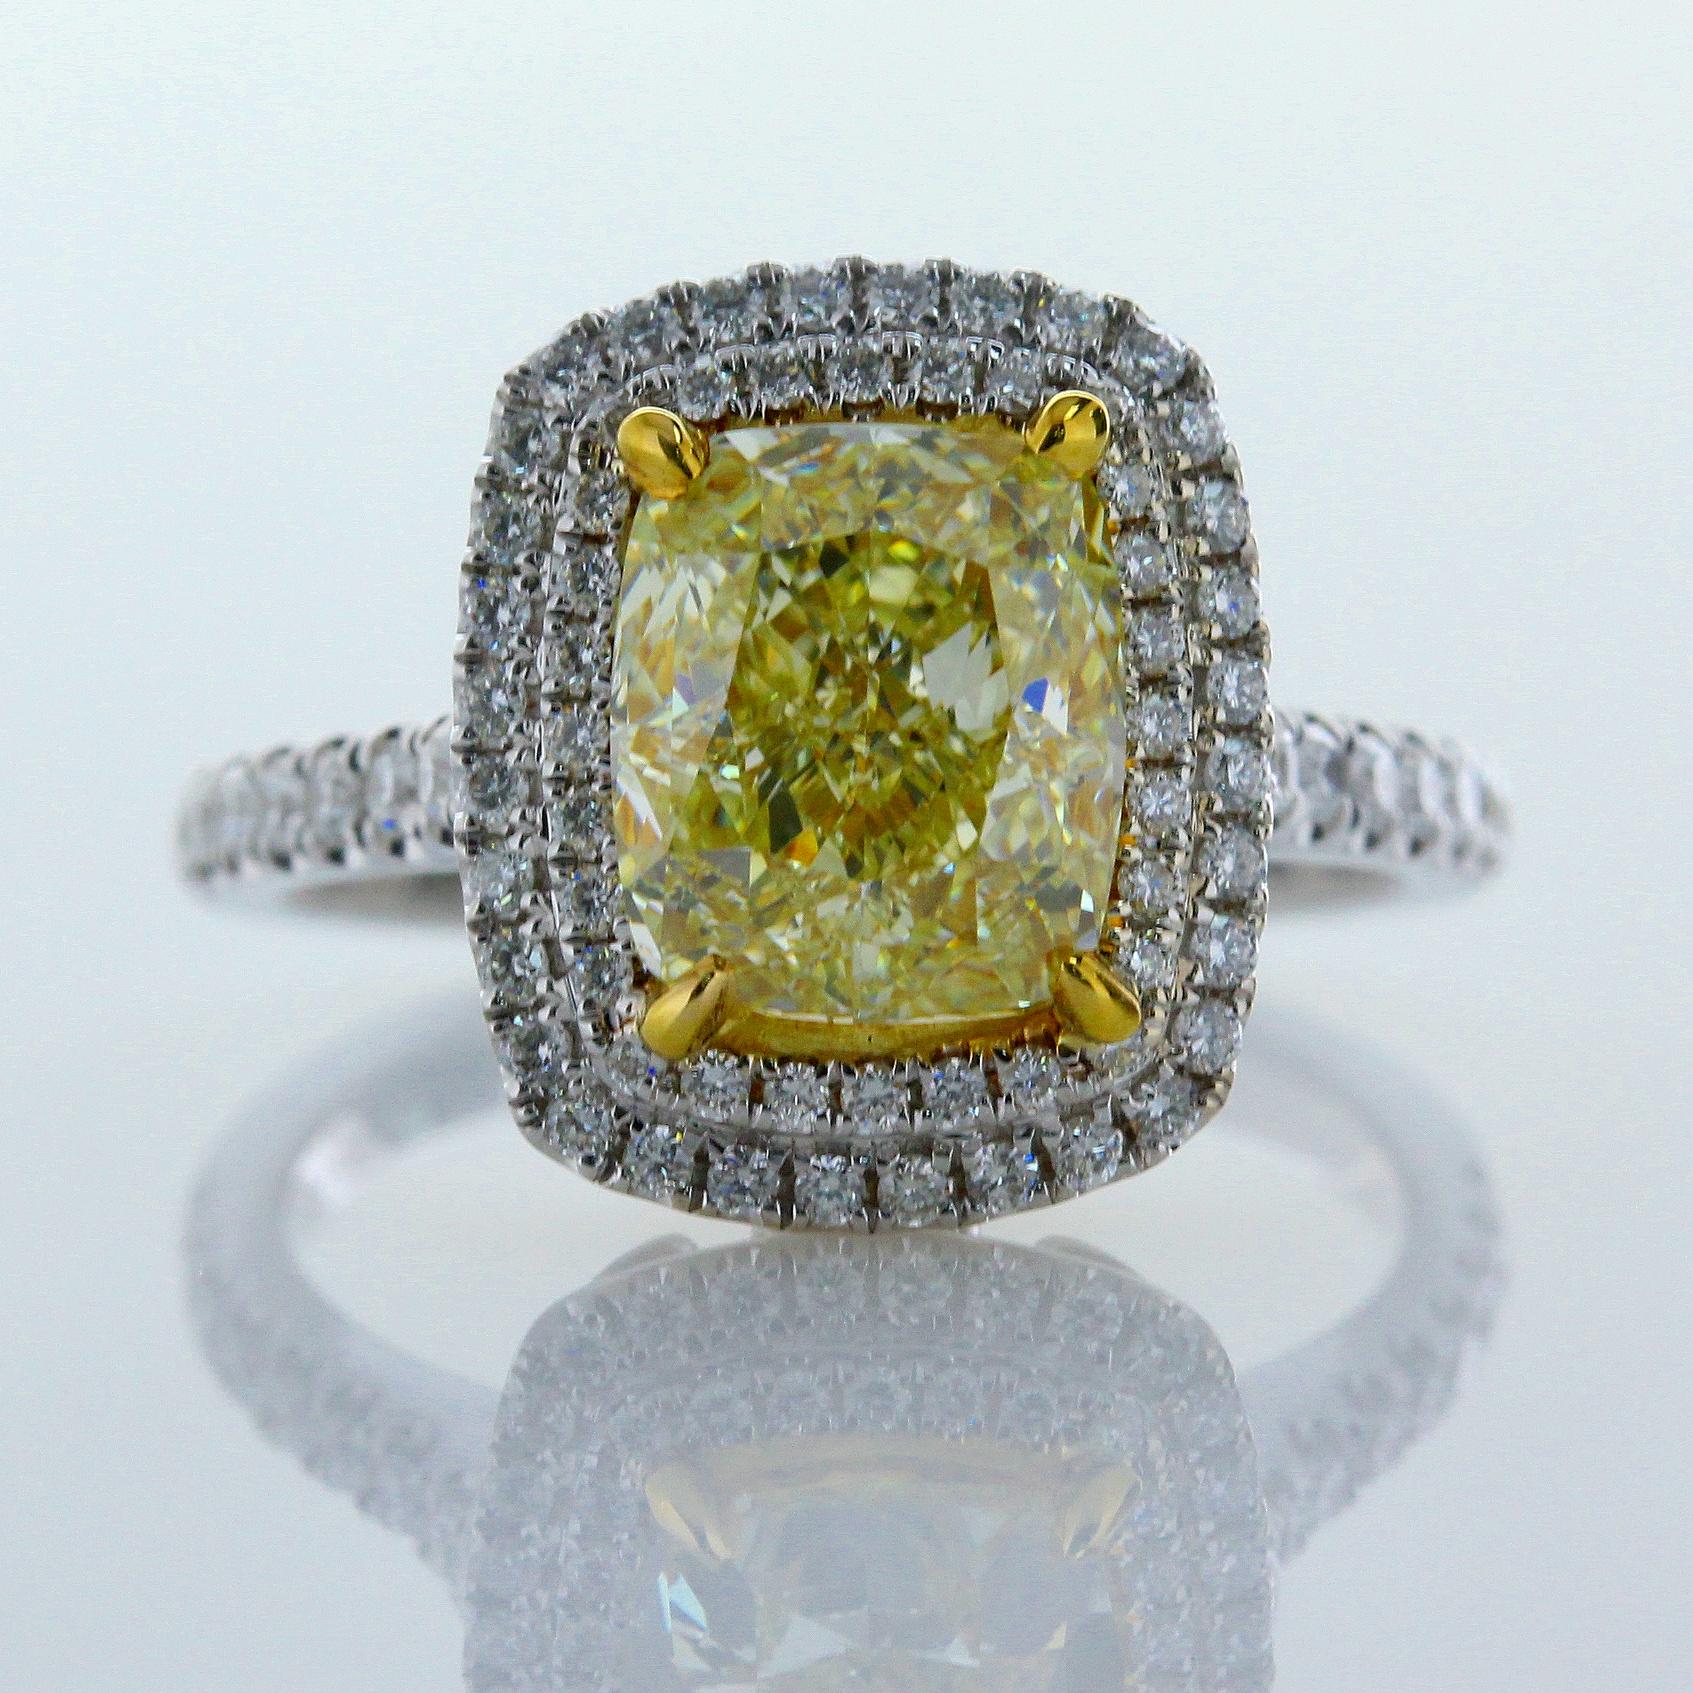 3.00 Carat Cushion Shape Natural Fancy Yellow Color Diamond VS1 Clarity 18 Karat White Gold Reversible Ring/Pendant. Measurements 8.59x7.38x5.22. 
Total Carat Weight on the ring is 3.60. 

This Ring converts into pendant with classic style